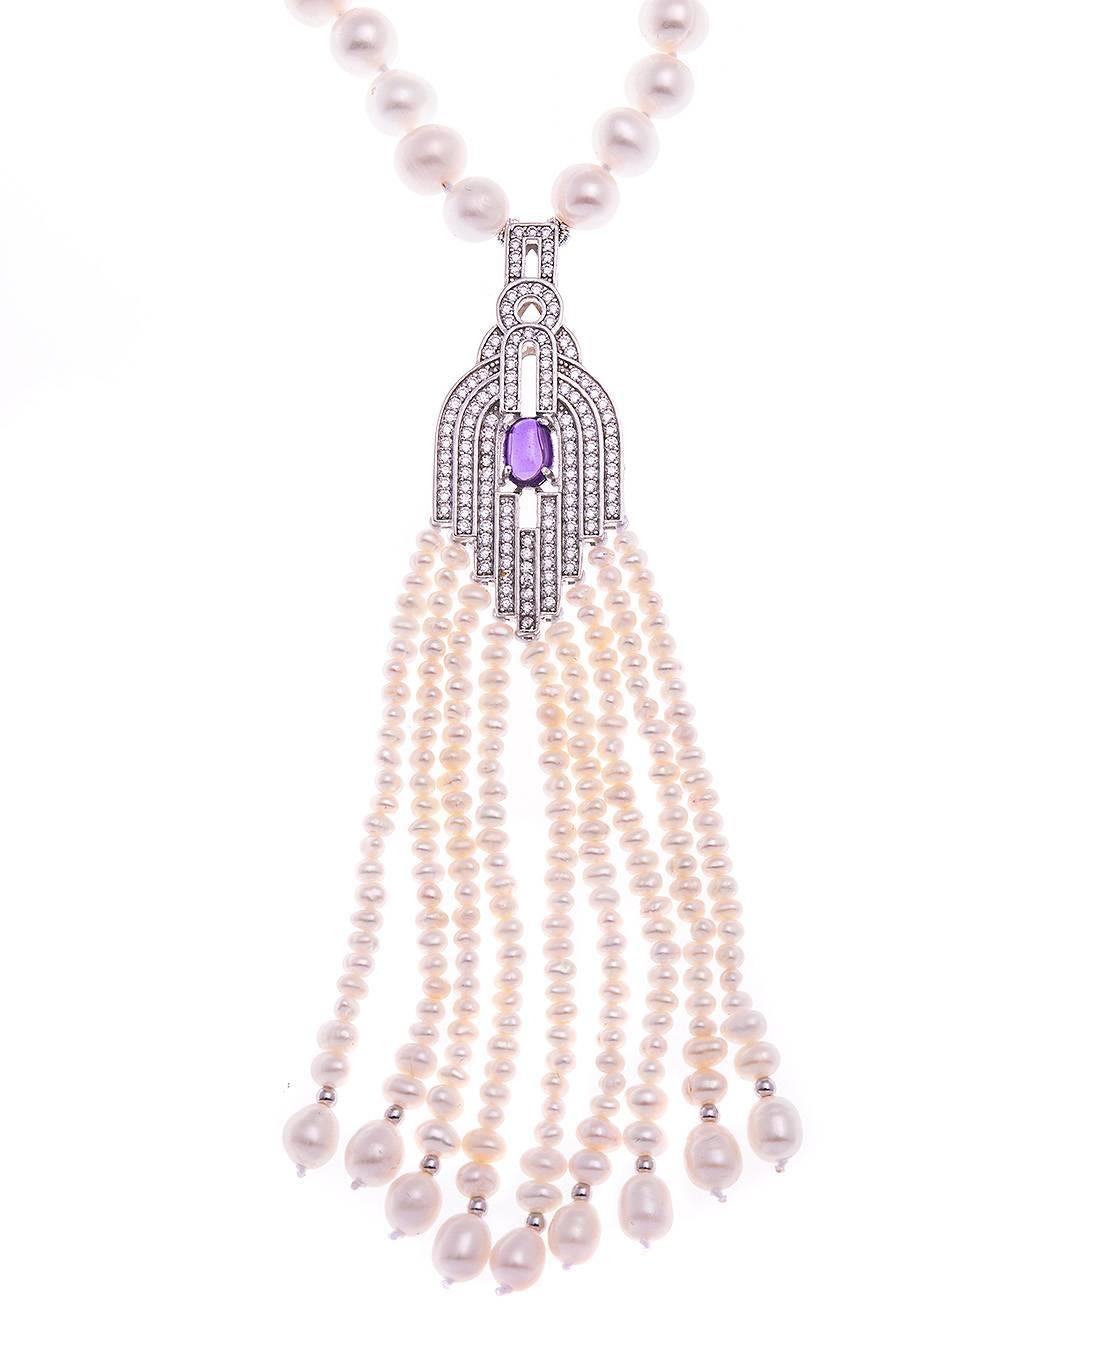 Take a step back in to the Roaring Twenties with this Great Gatsby inspired necklace. With over 32